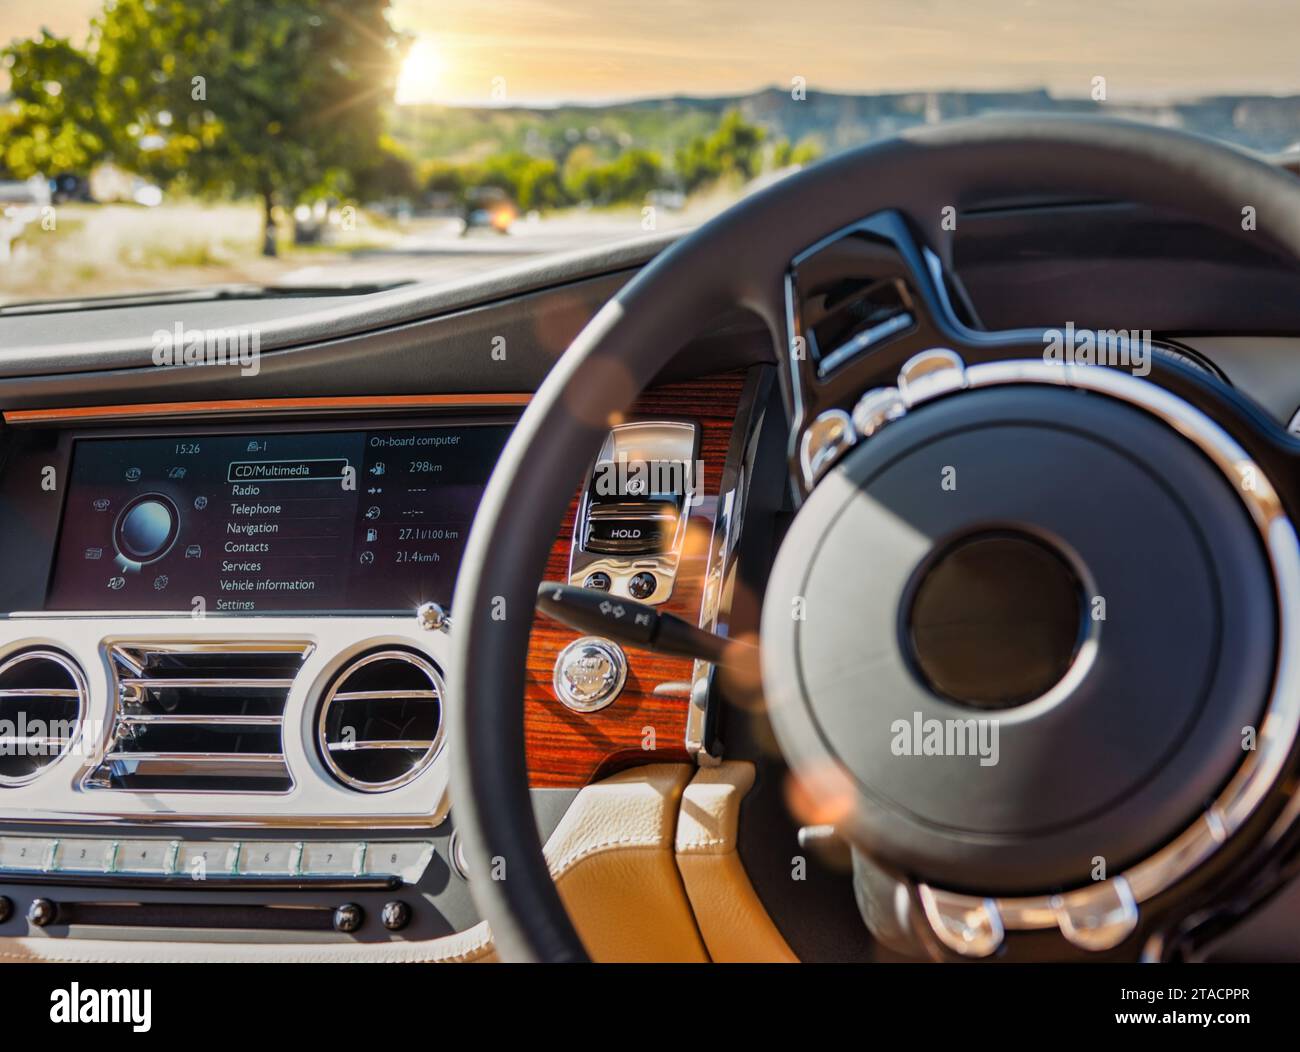 car breakdown , parked on the side of the road at sunset, car interior with multimedia radio, gauges and steering wheel . Stock Photo